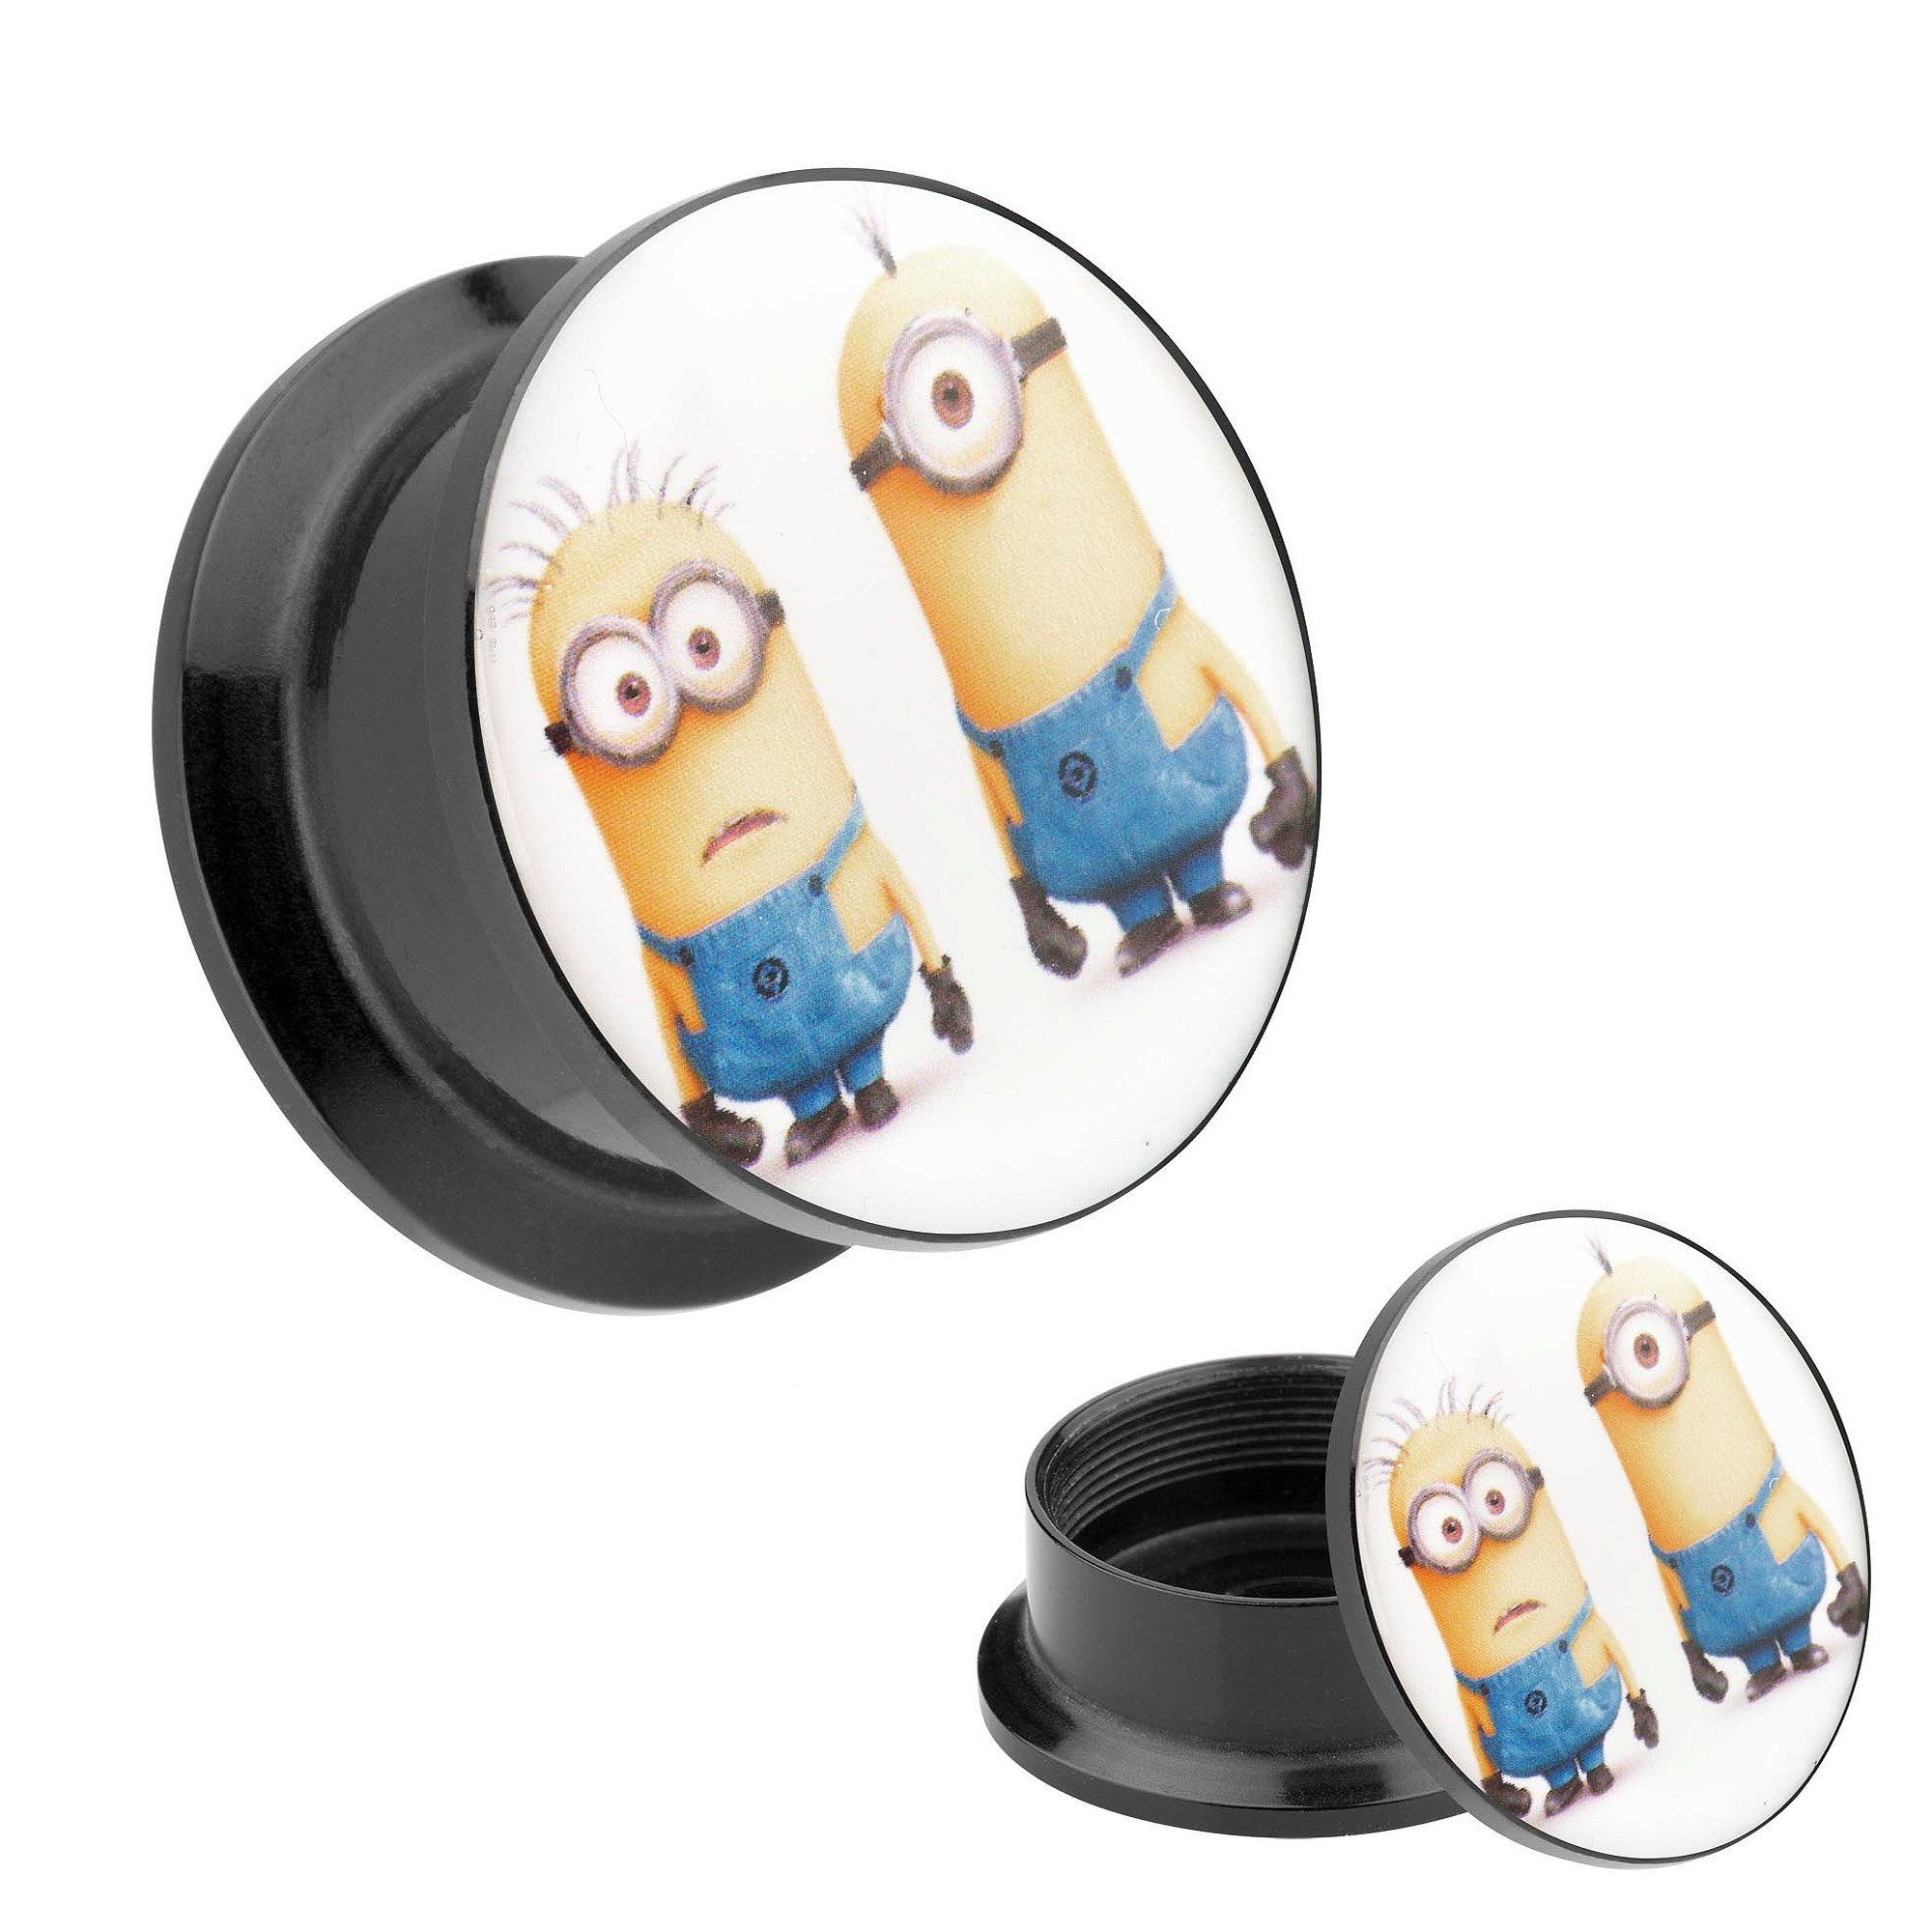 Taffstyle Ohrpiercing Minions Plug Comic Comic, Motiv Minions Ohrpiercing Plug Picture Motiv Flesh 2 Ohr Piercing 2 Tunnel Picture